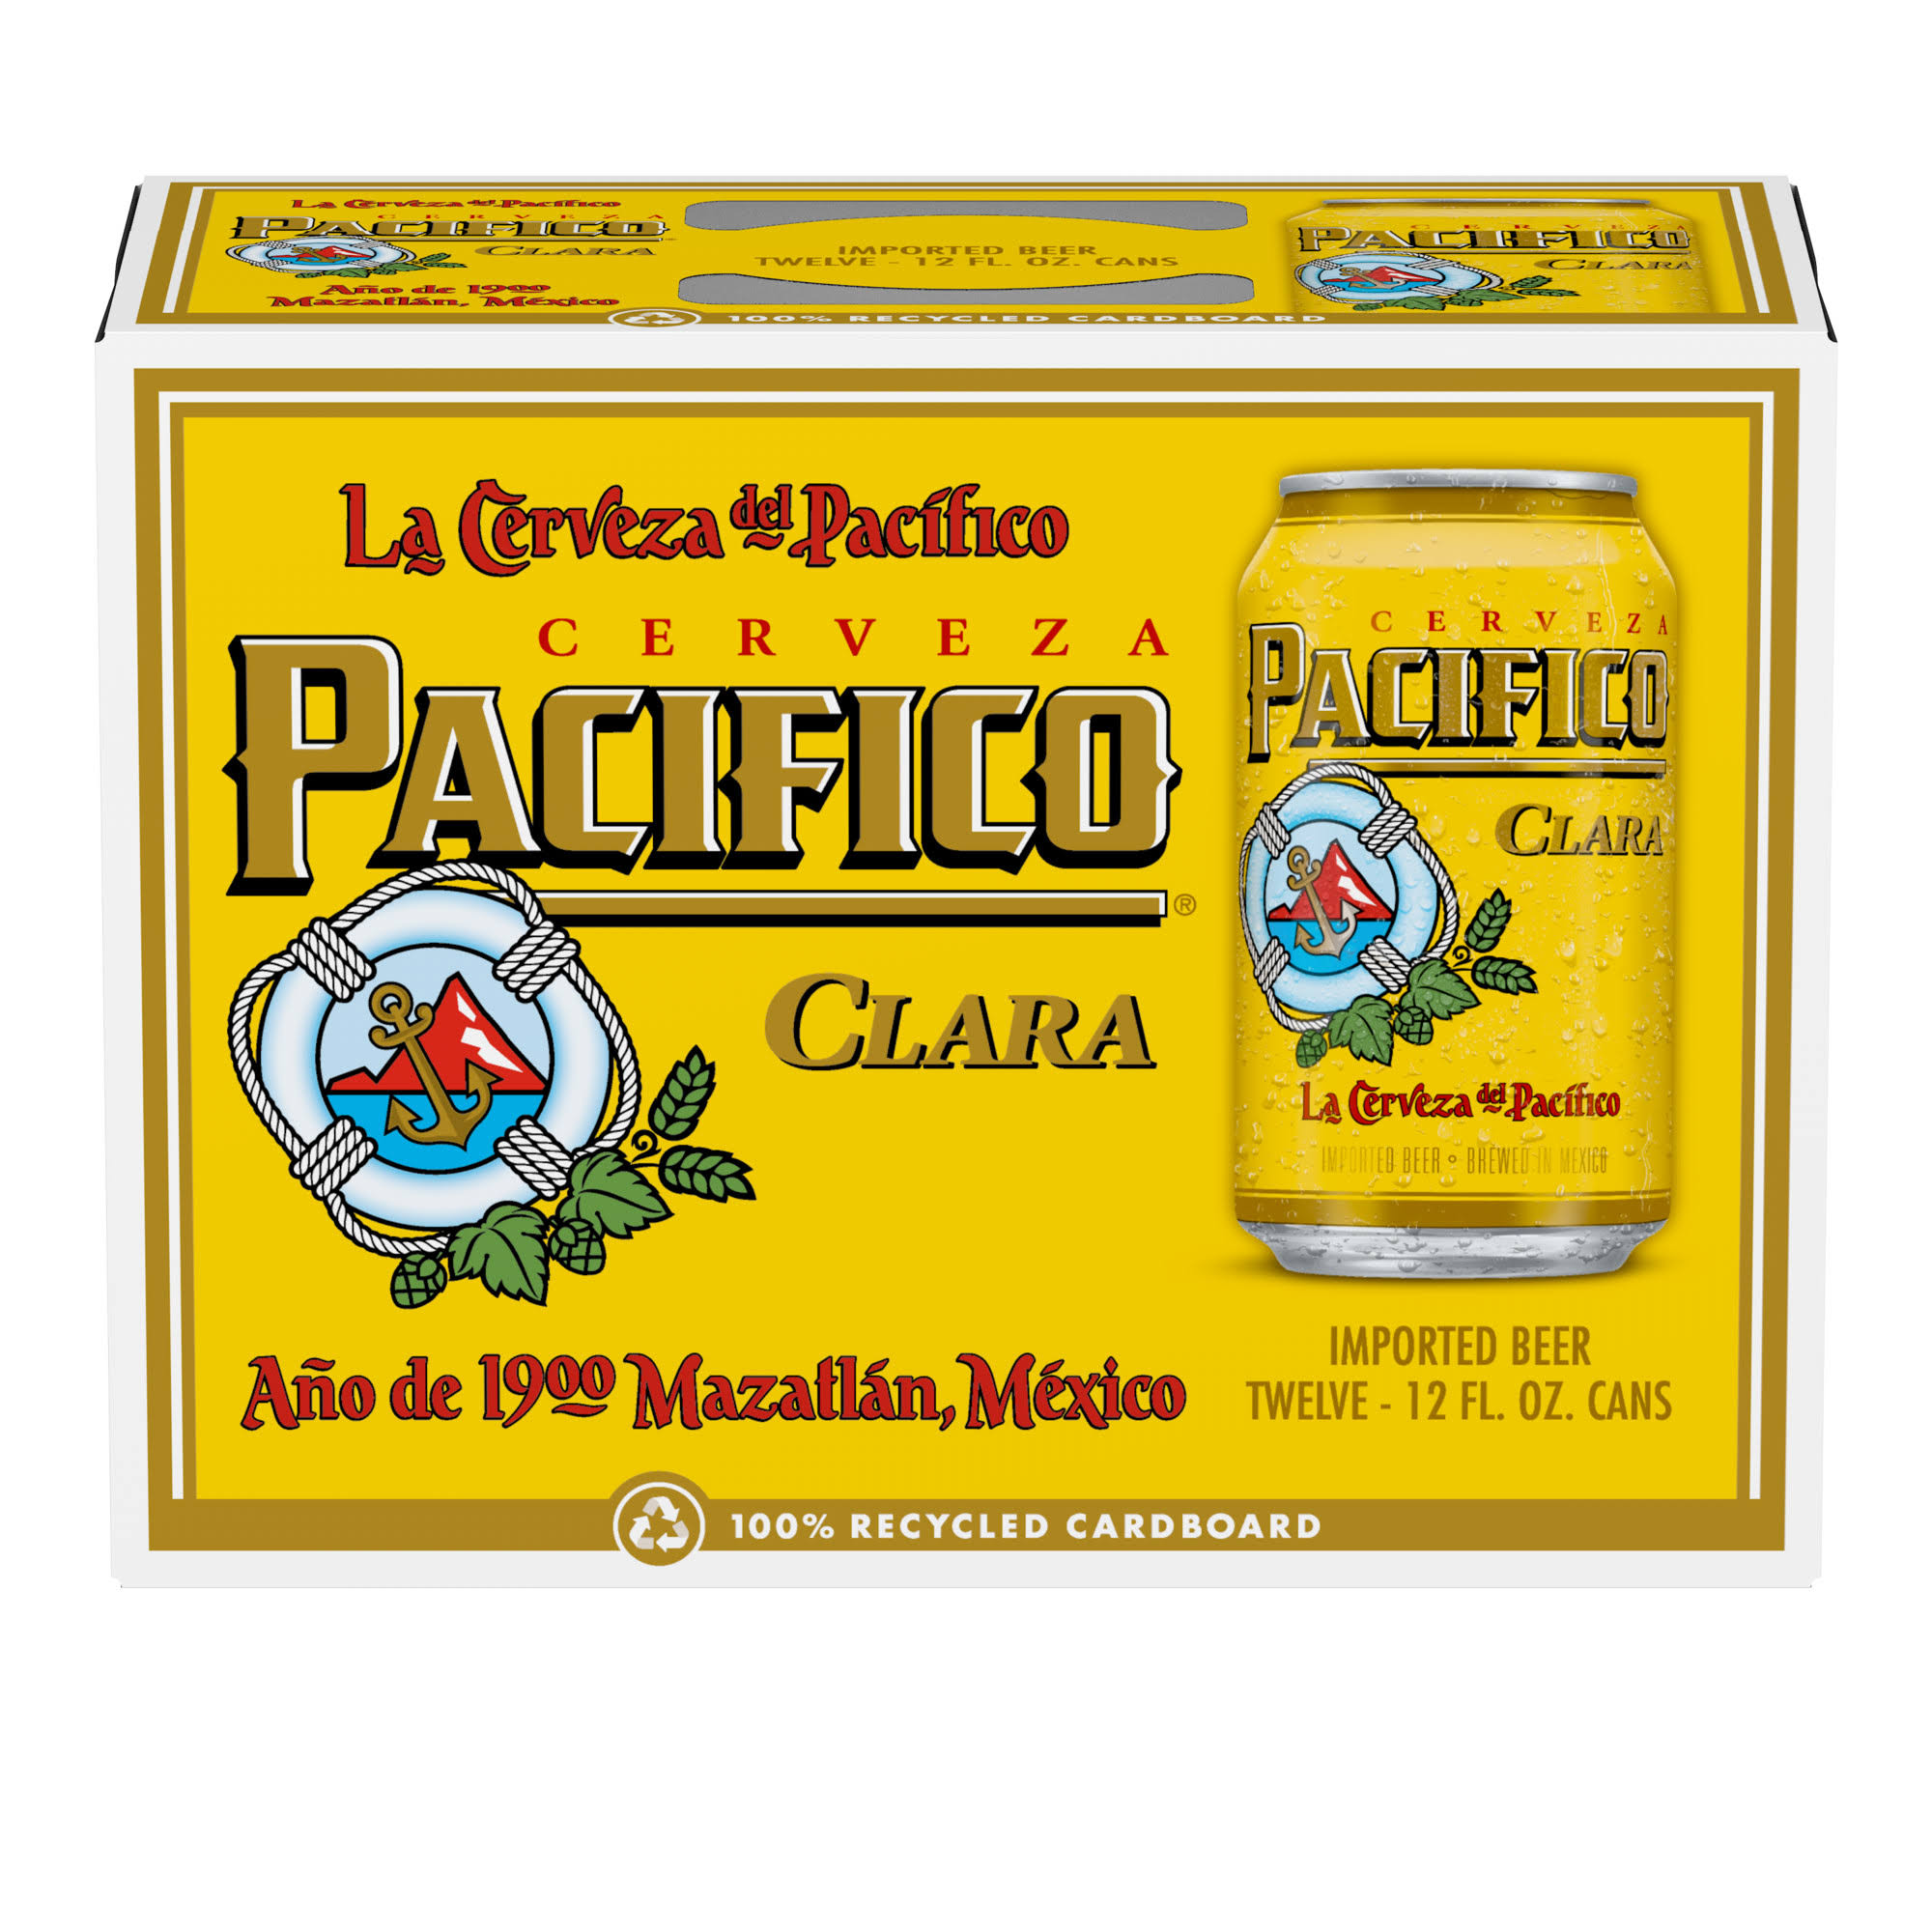 Pacifico Beer, Clara - 12 pack, 12 fl oz cans